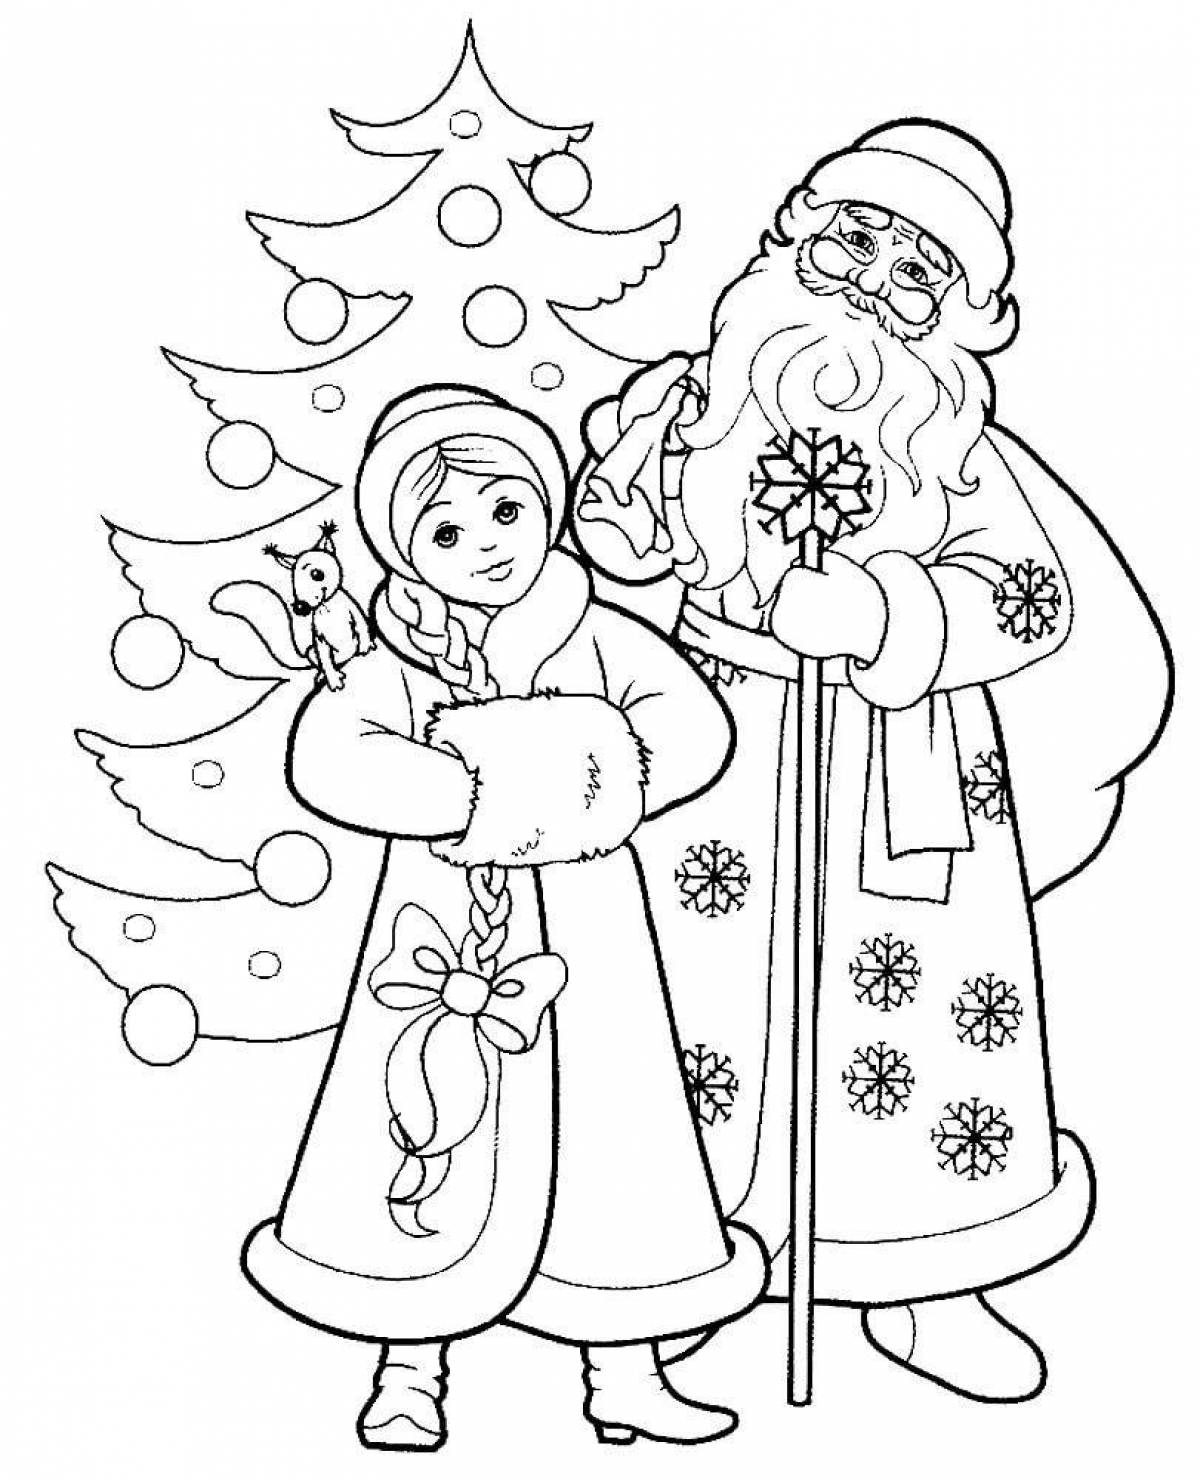 Santa Claus and Snow Maiden for kids #8